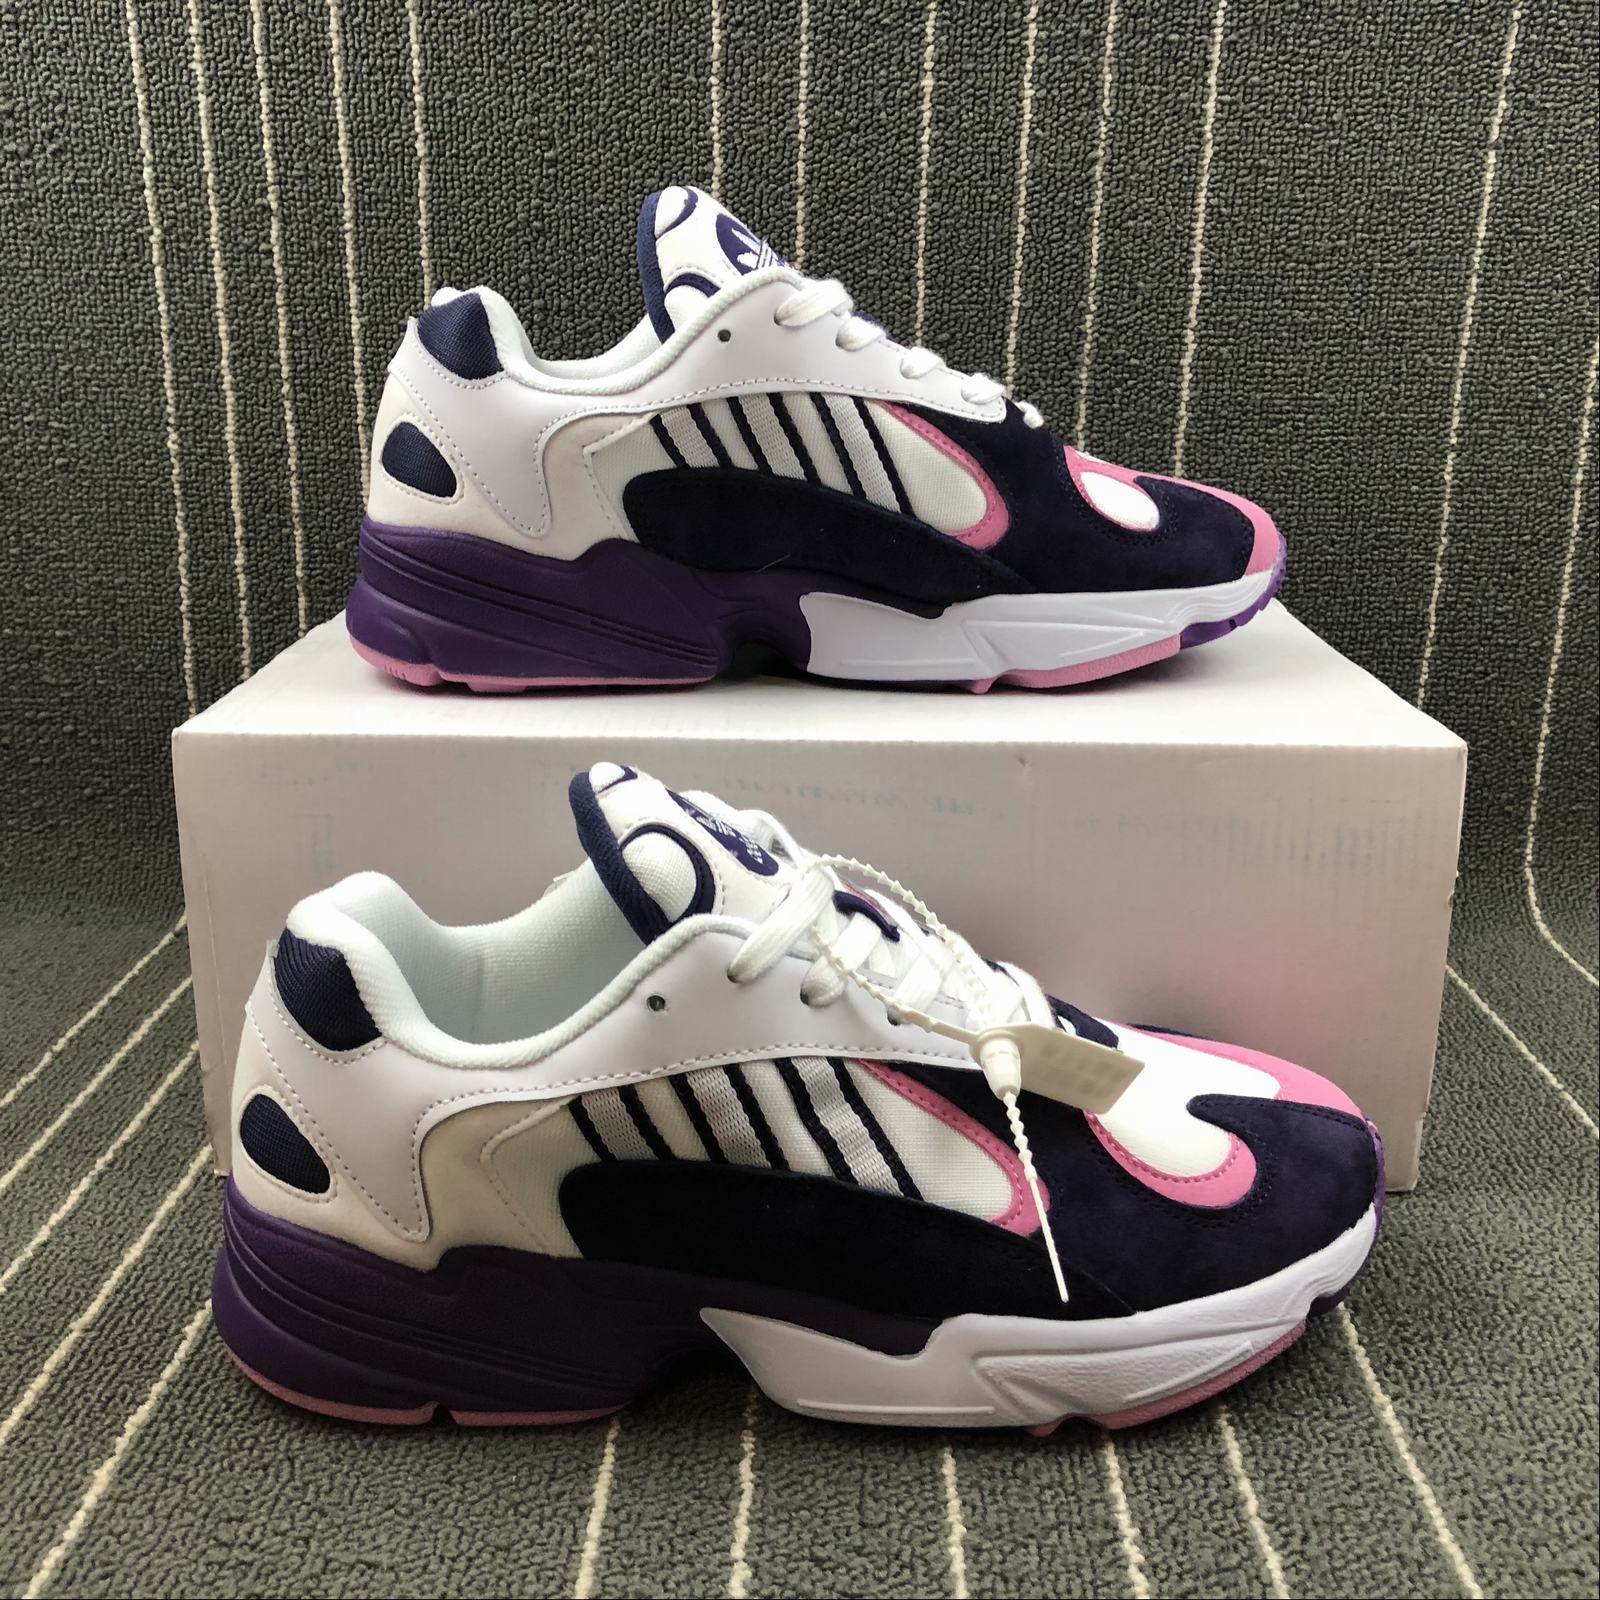 dragon ball z adidas shoes for sale